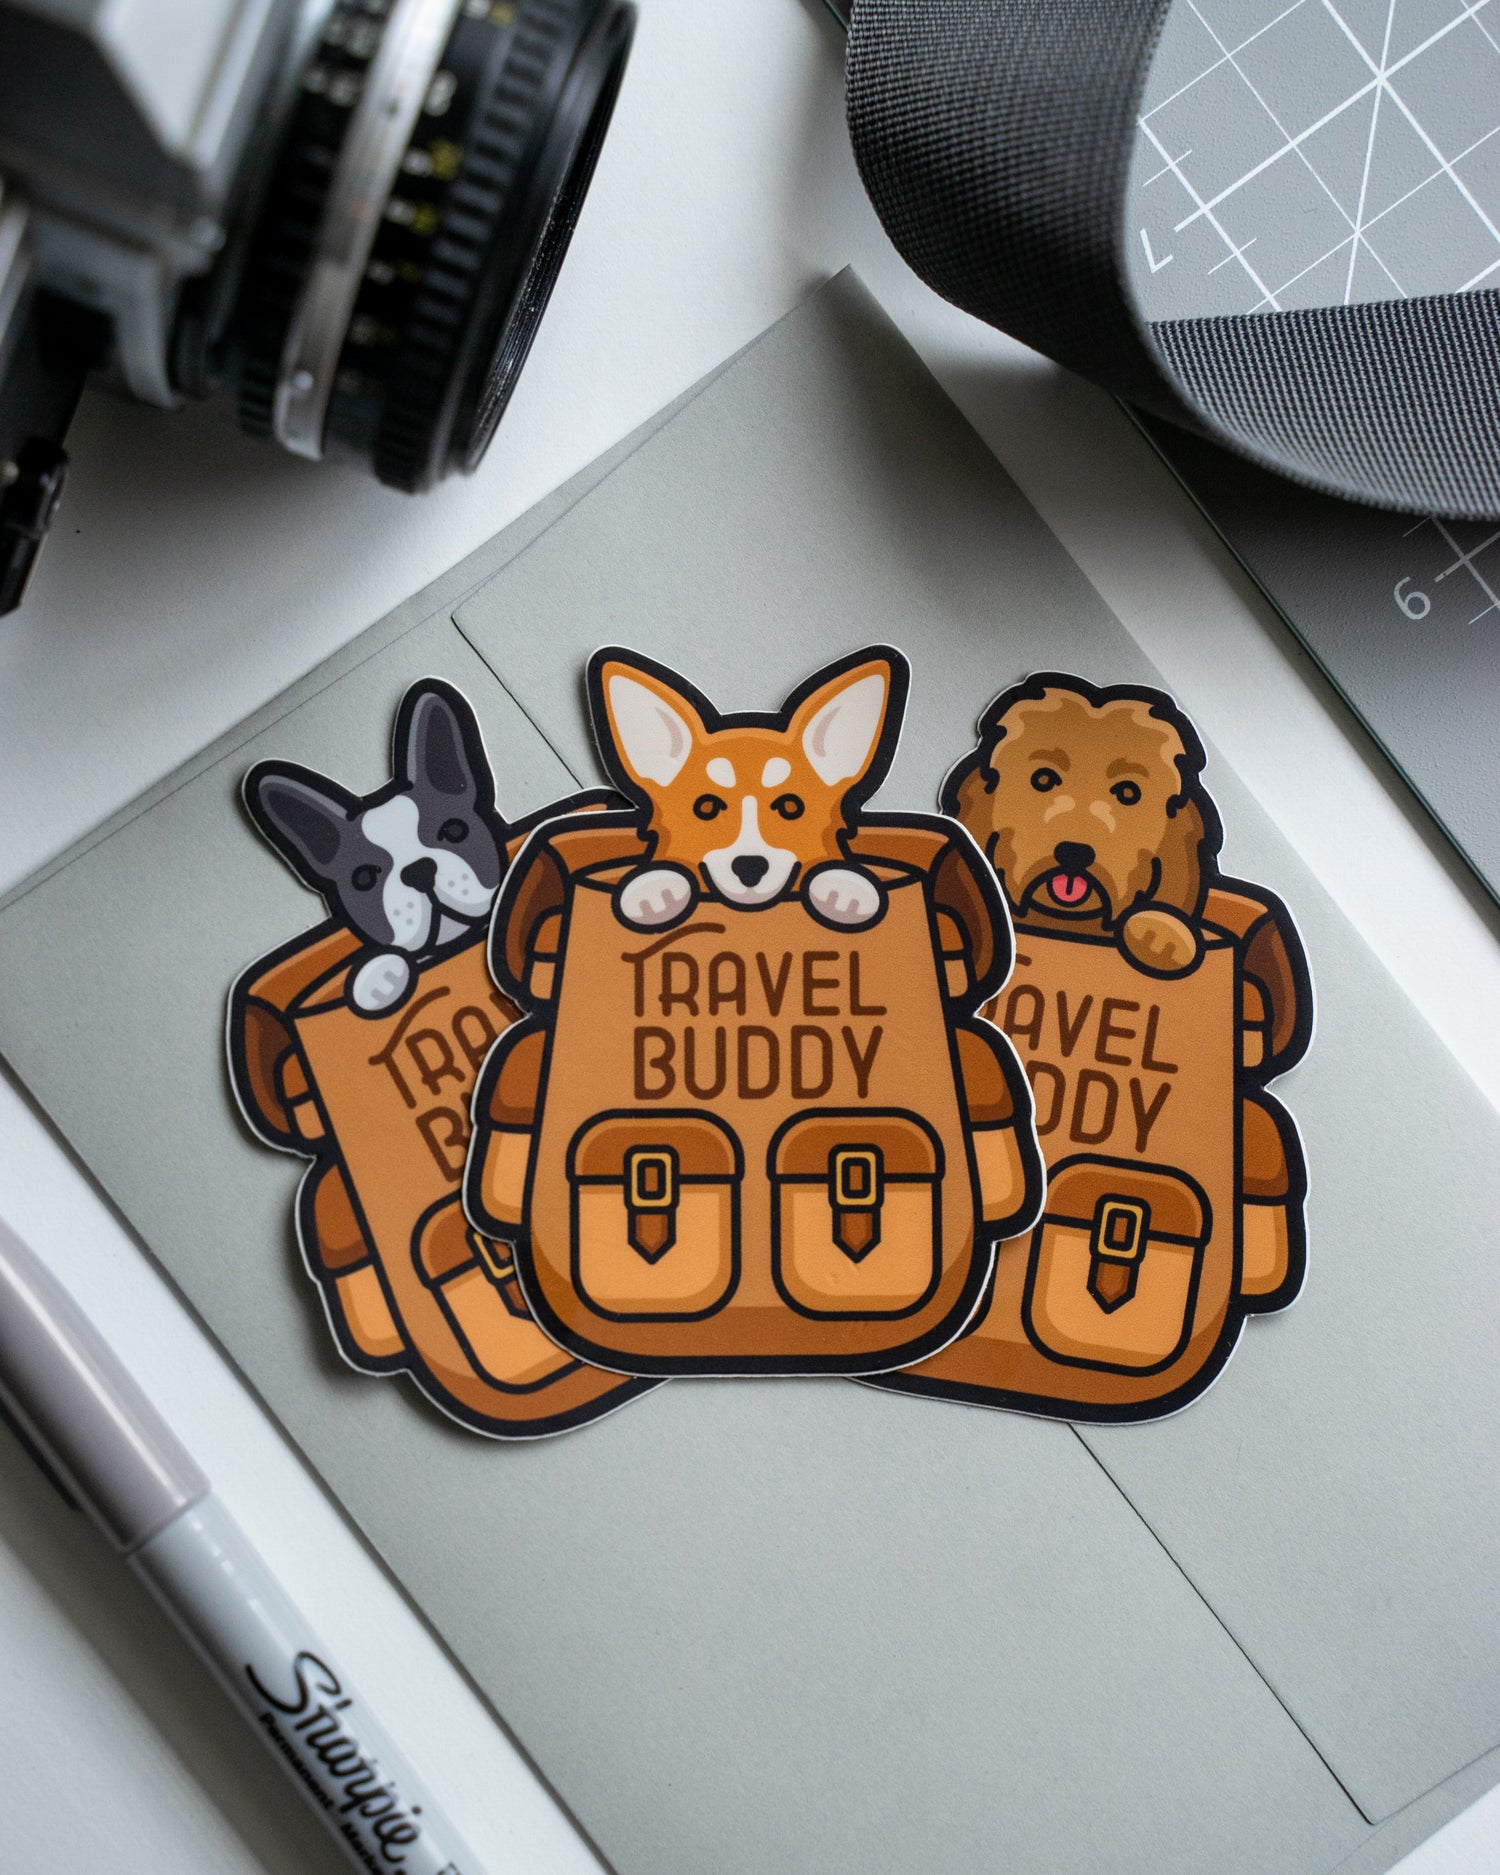 Photo by Done By Alex on Unsplash. Three die-cut stickers of dogs in backpacks